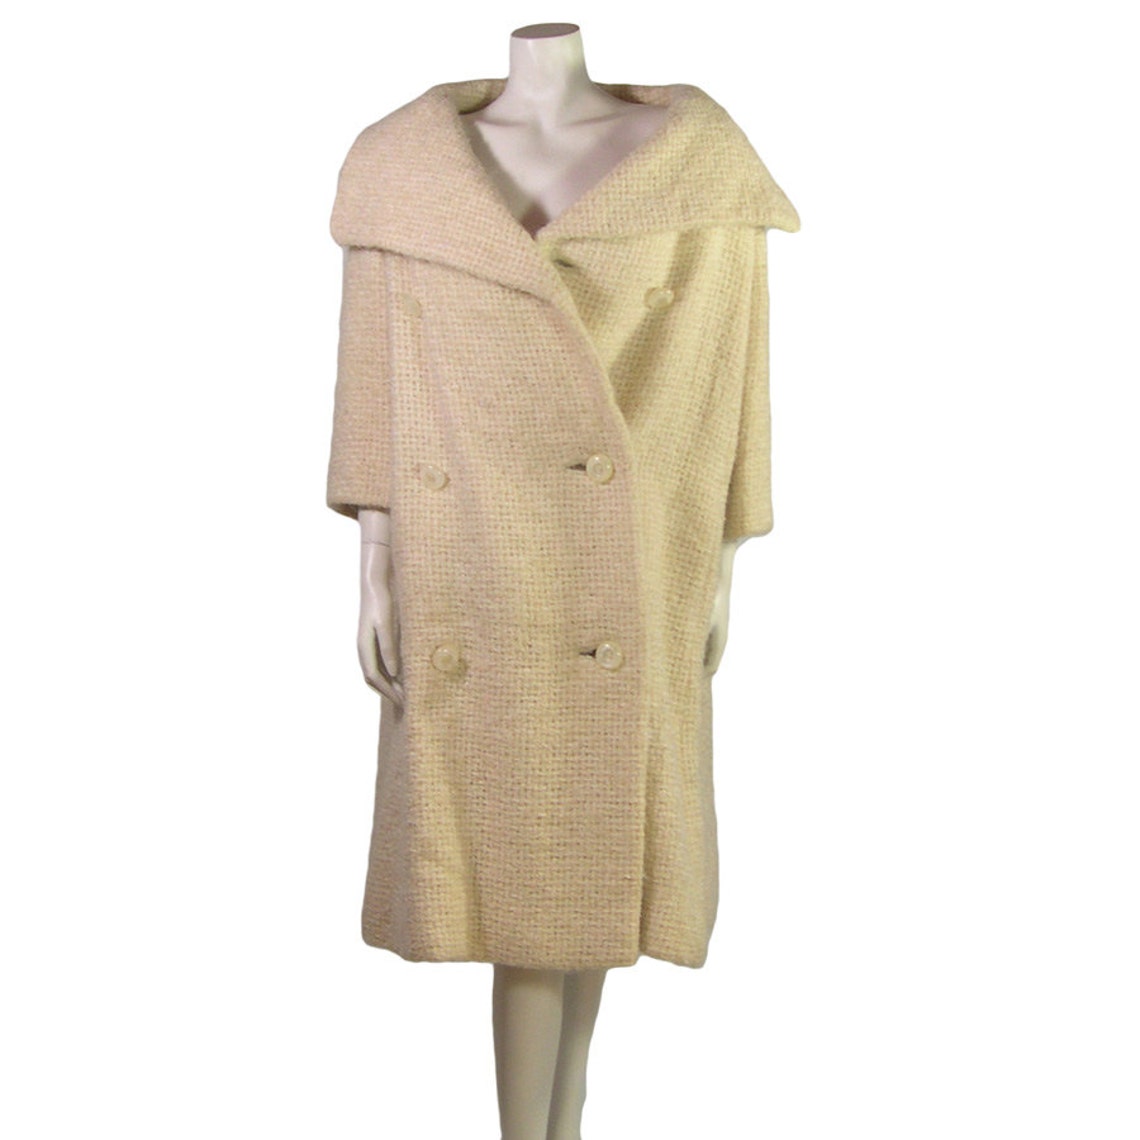 Vintage Cream Swagger Coat by Julius Garfinkle & Co 1950s - Etsy